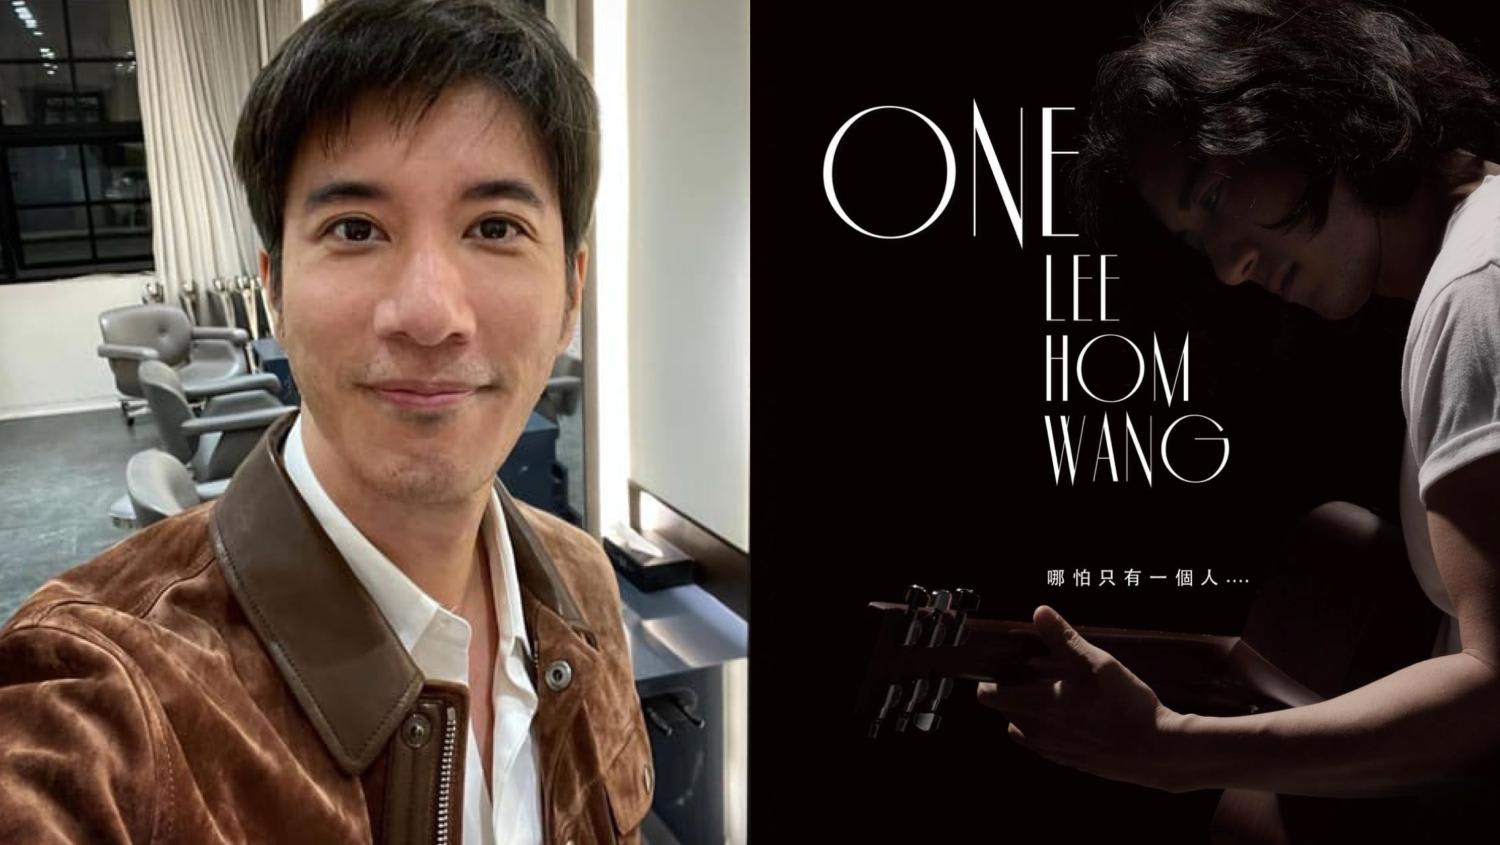 Wang Leehom Says He Will Perform Even If “Only One Person” Shows Up For His  Comeback Concert In Las Vegas Next Month - 8days